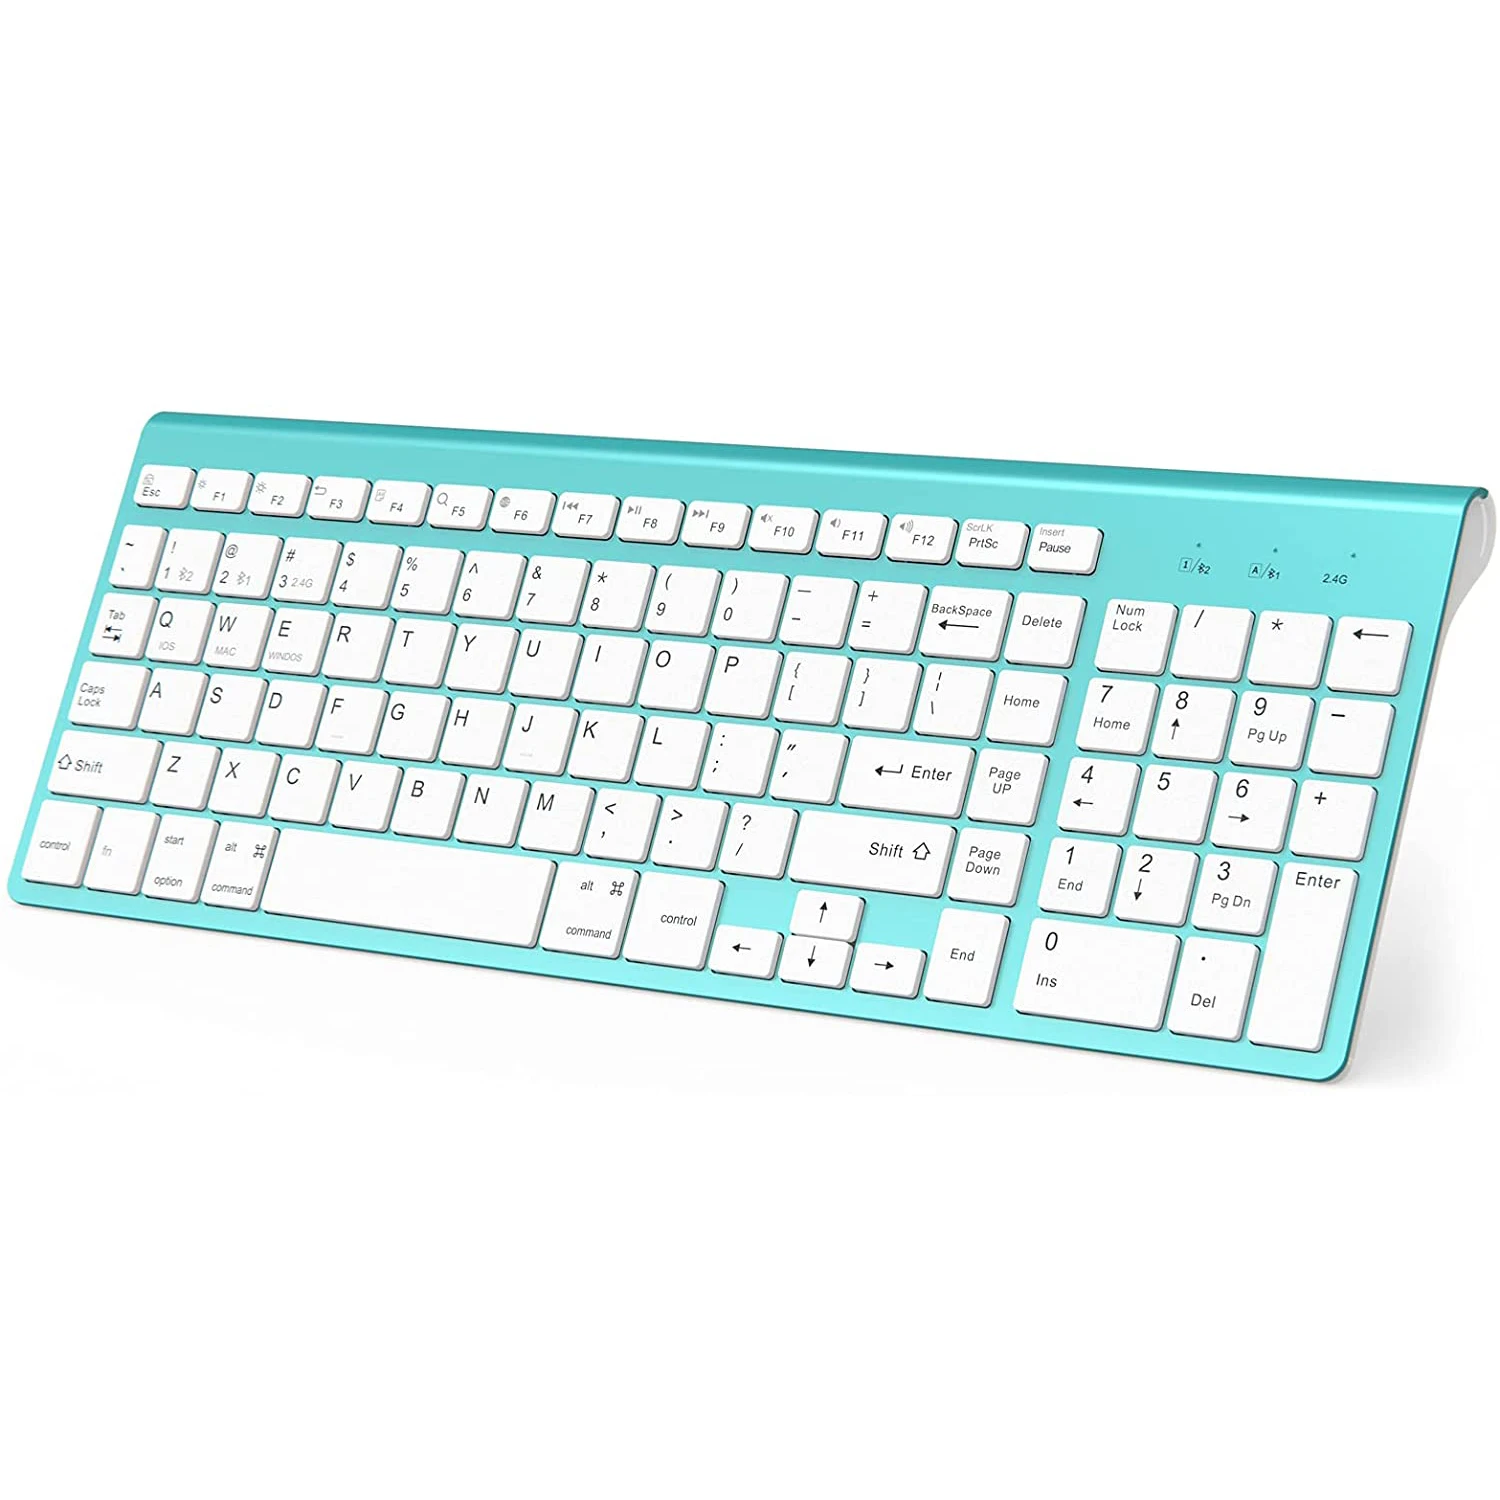 Wireless Bluetooth Keyboard，(2.4G+BT3.0+BT5.0) Compatible With IMac/Mac, IPad Air/Pro,Laptop,Android,Windows-Turquoise.Blue best office keyboard